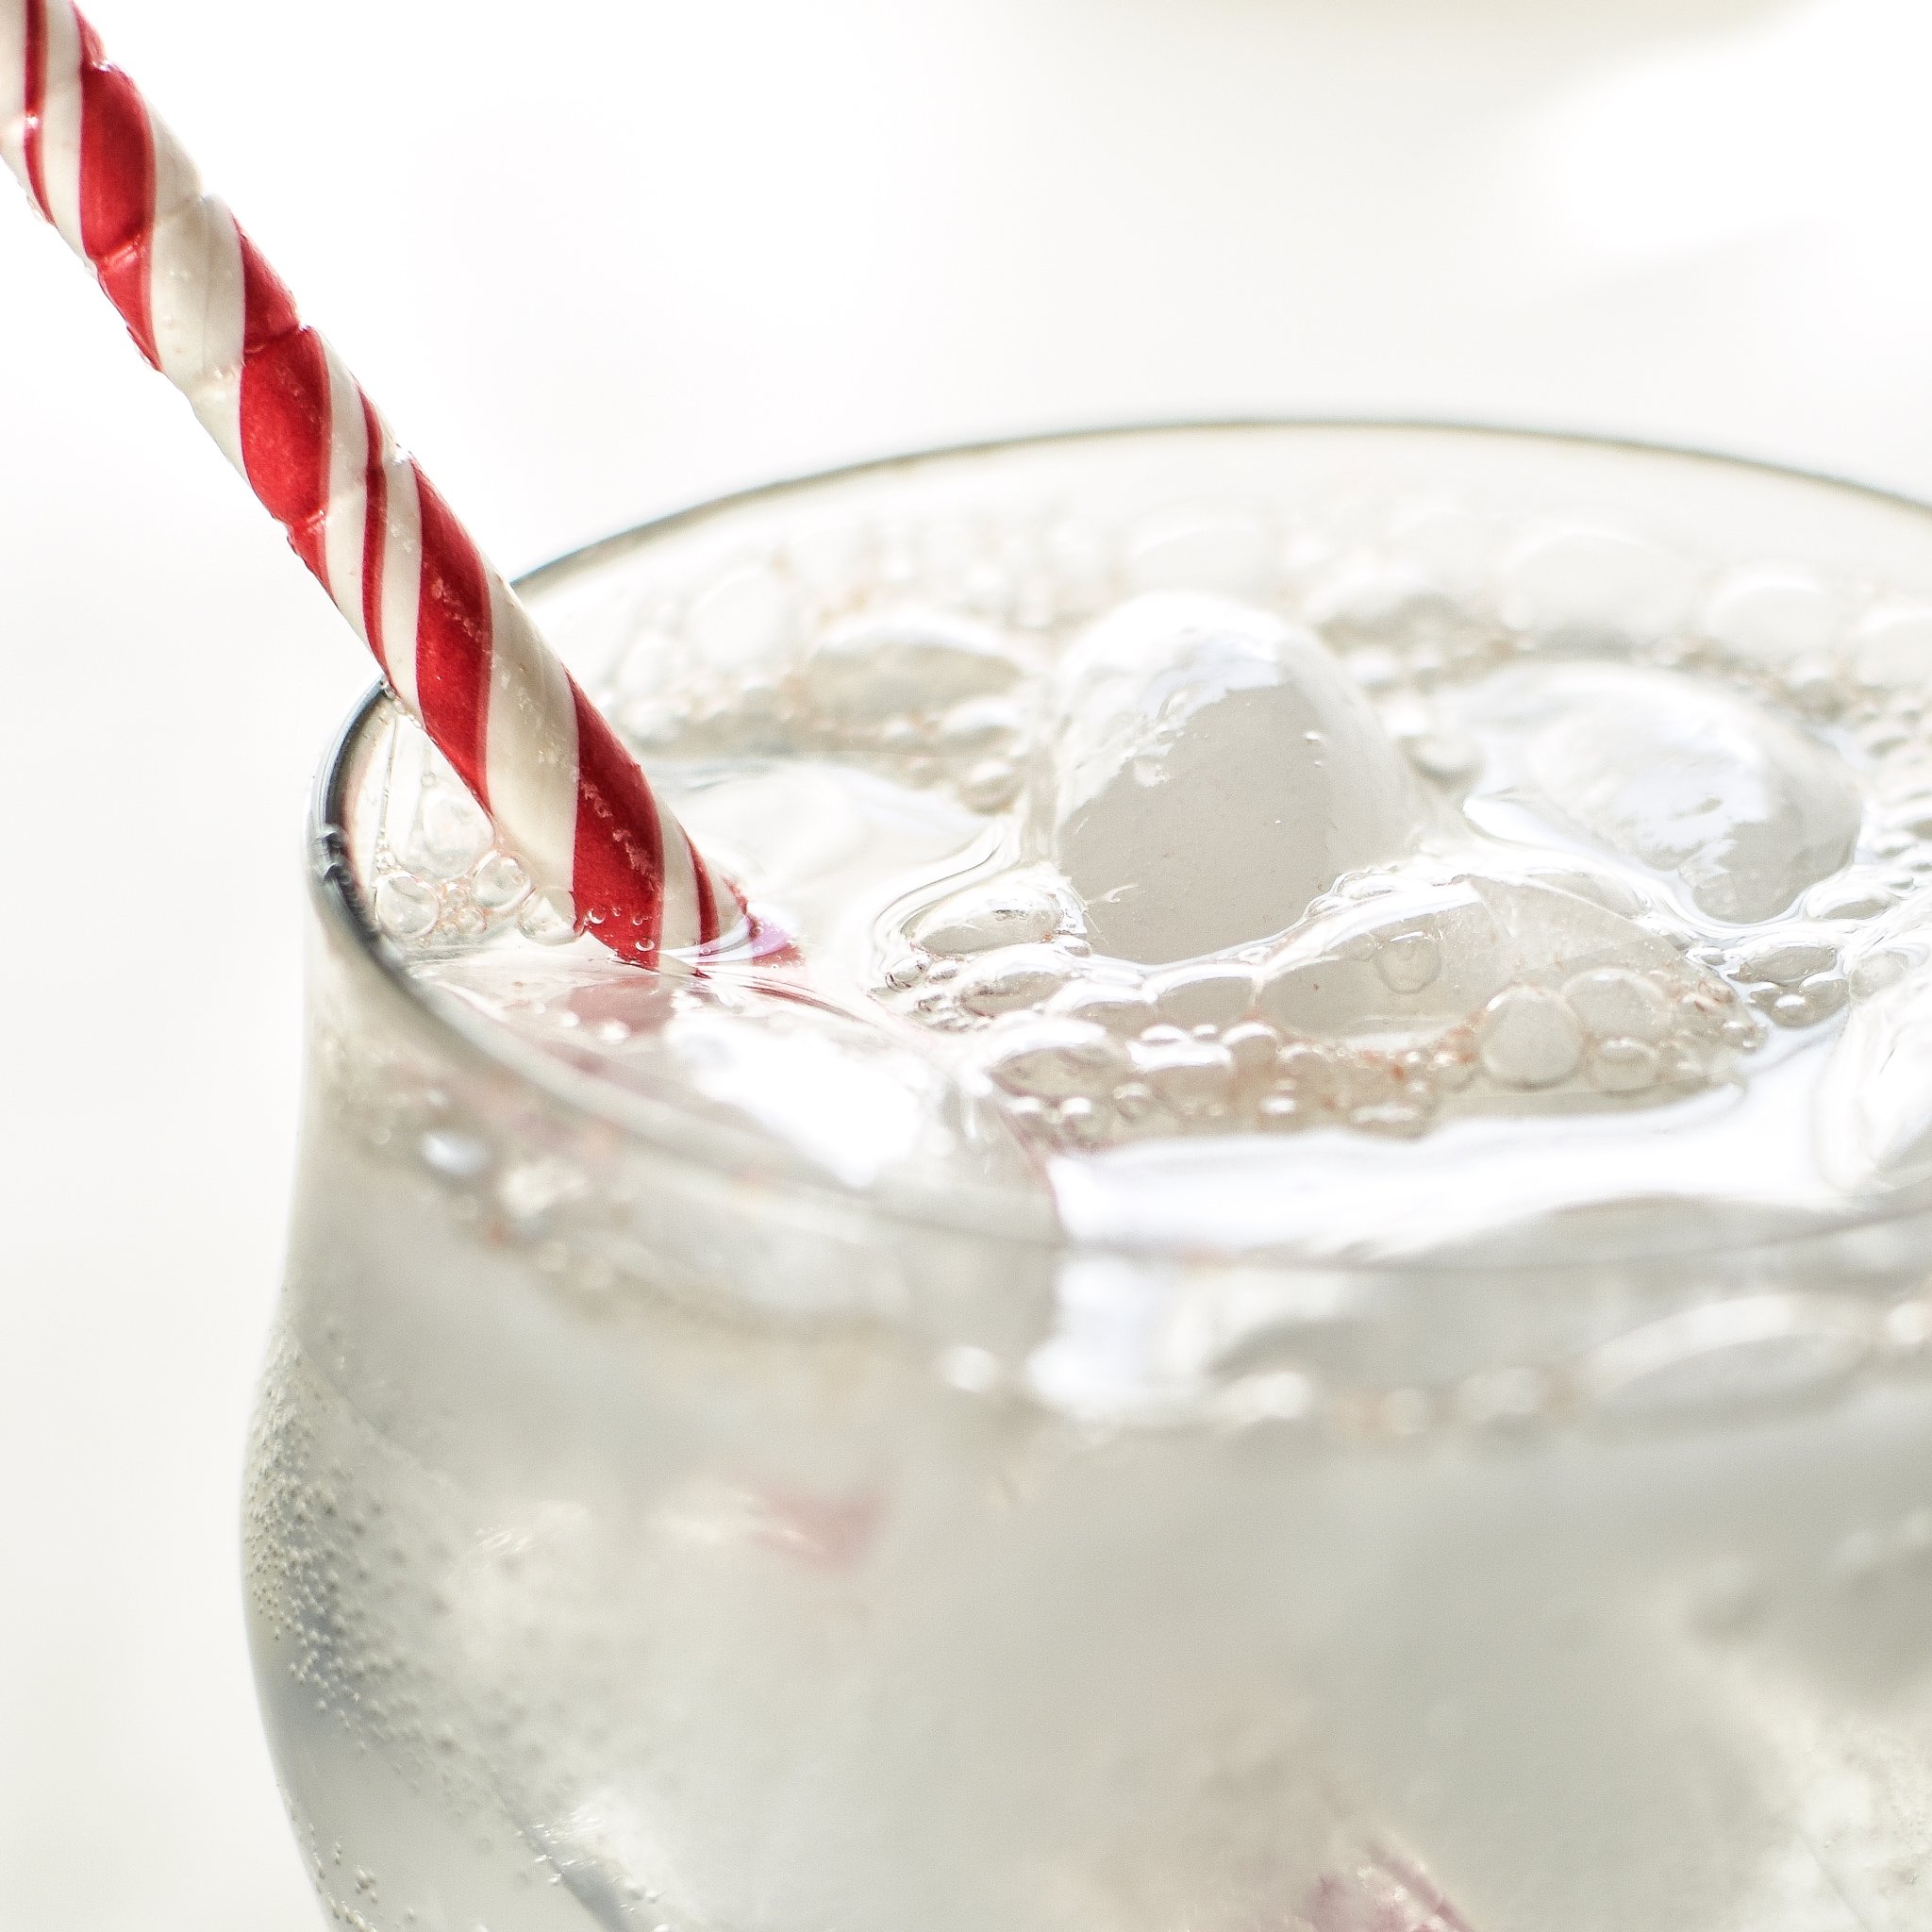 A cold fizzy beverage with lots of bubbles at the top and a red and white candy cane striped straw. Homemade LaCroix